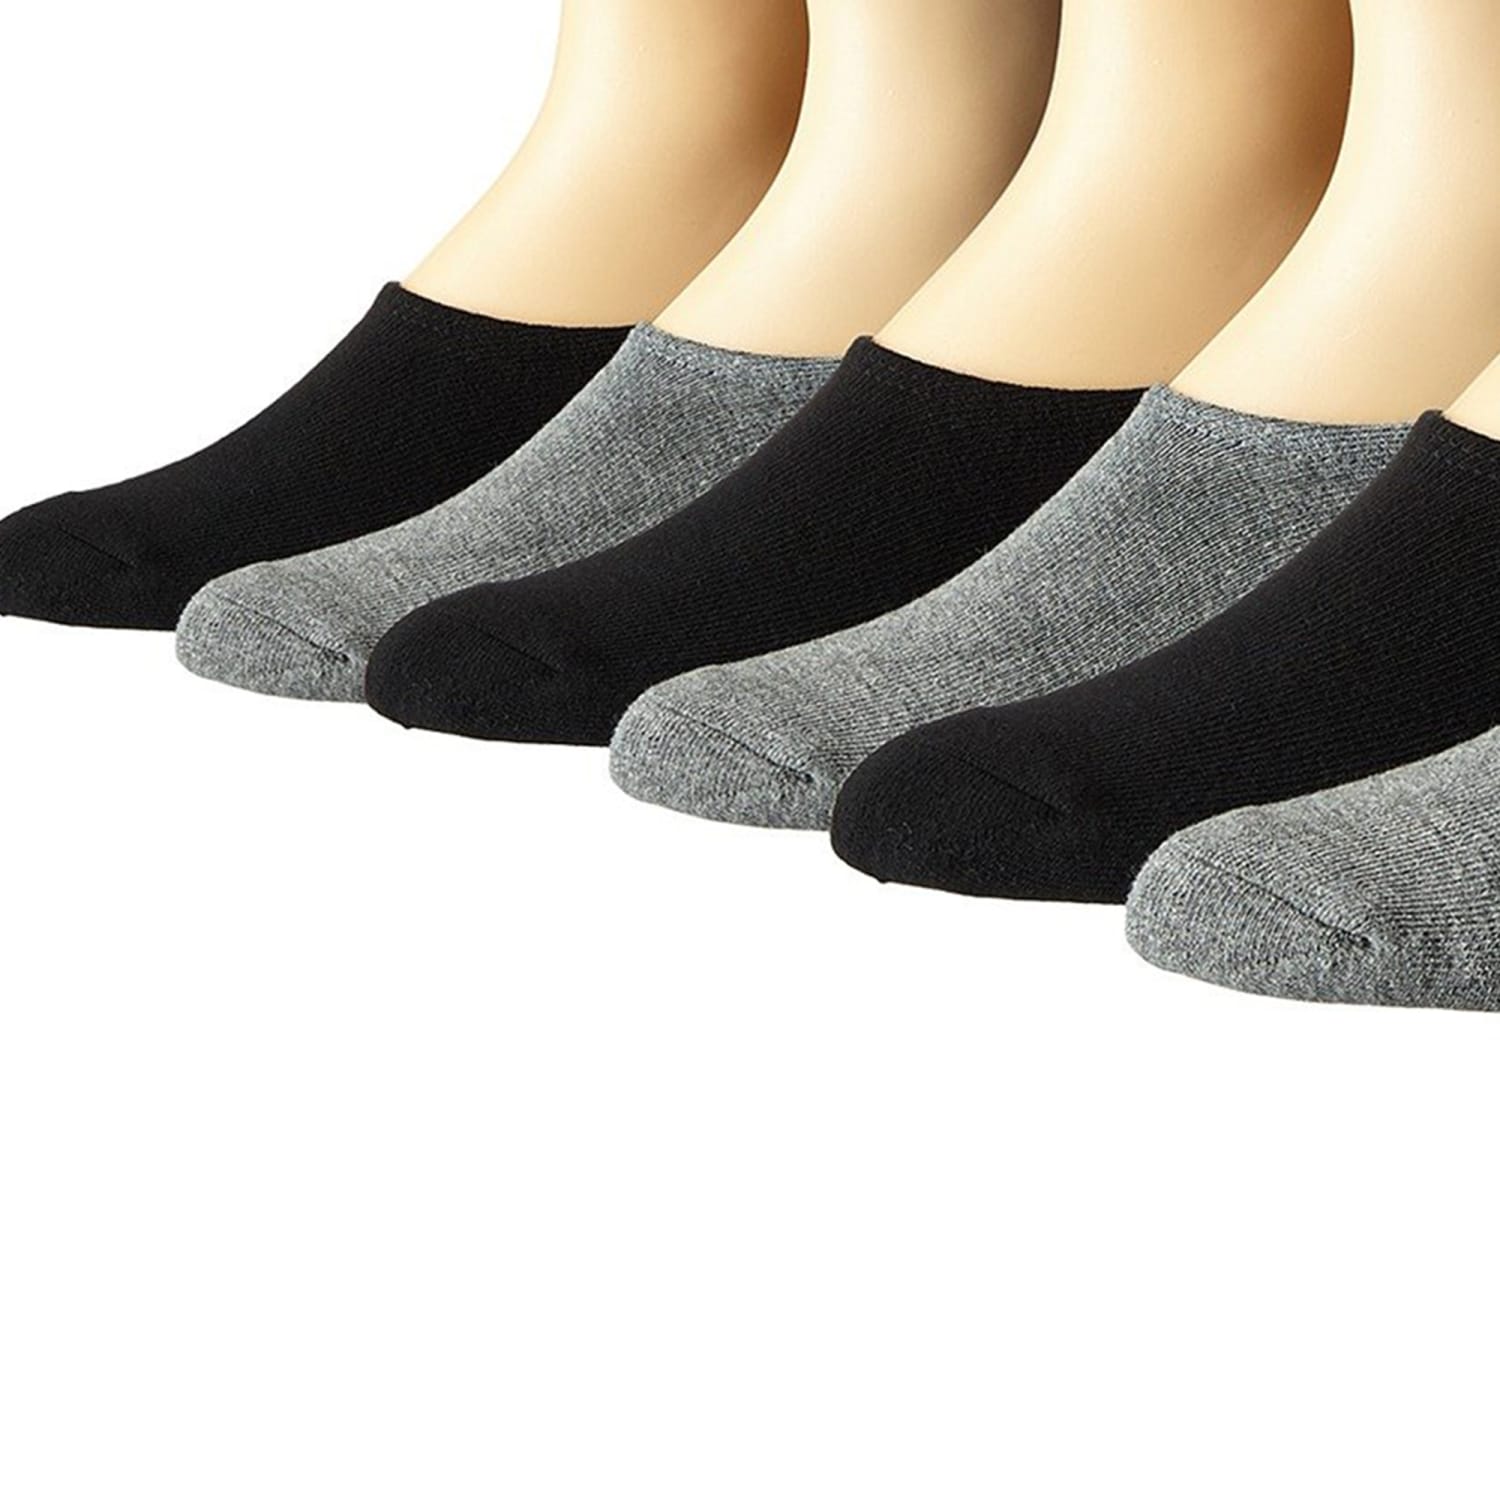 We may have found the best no-show socks that won't slip down in your shoes